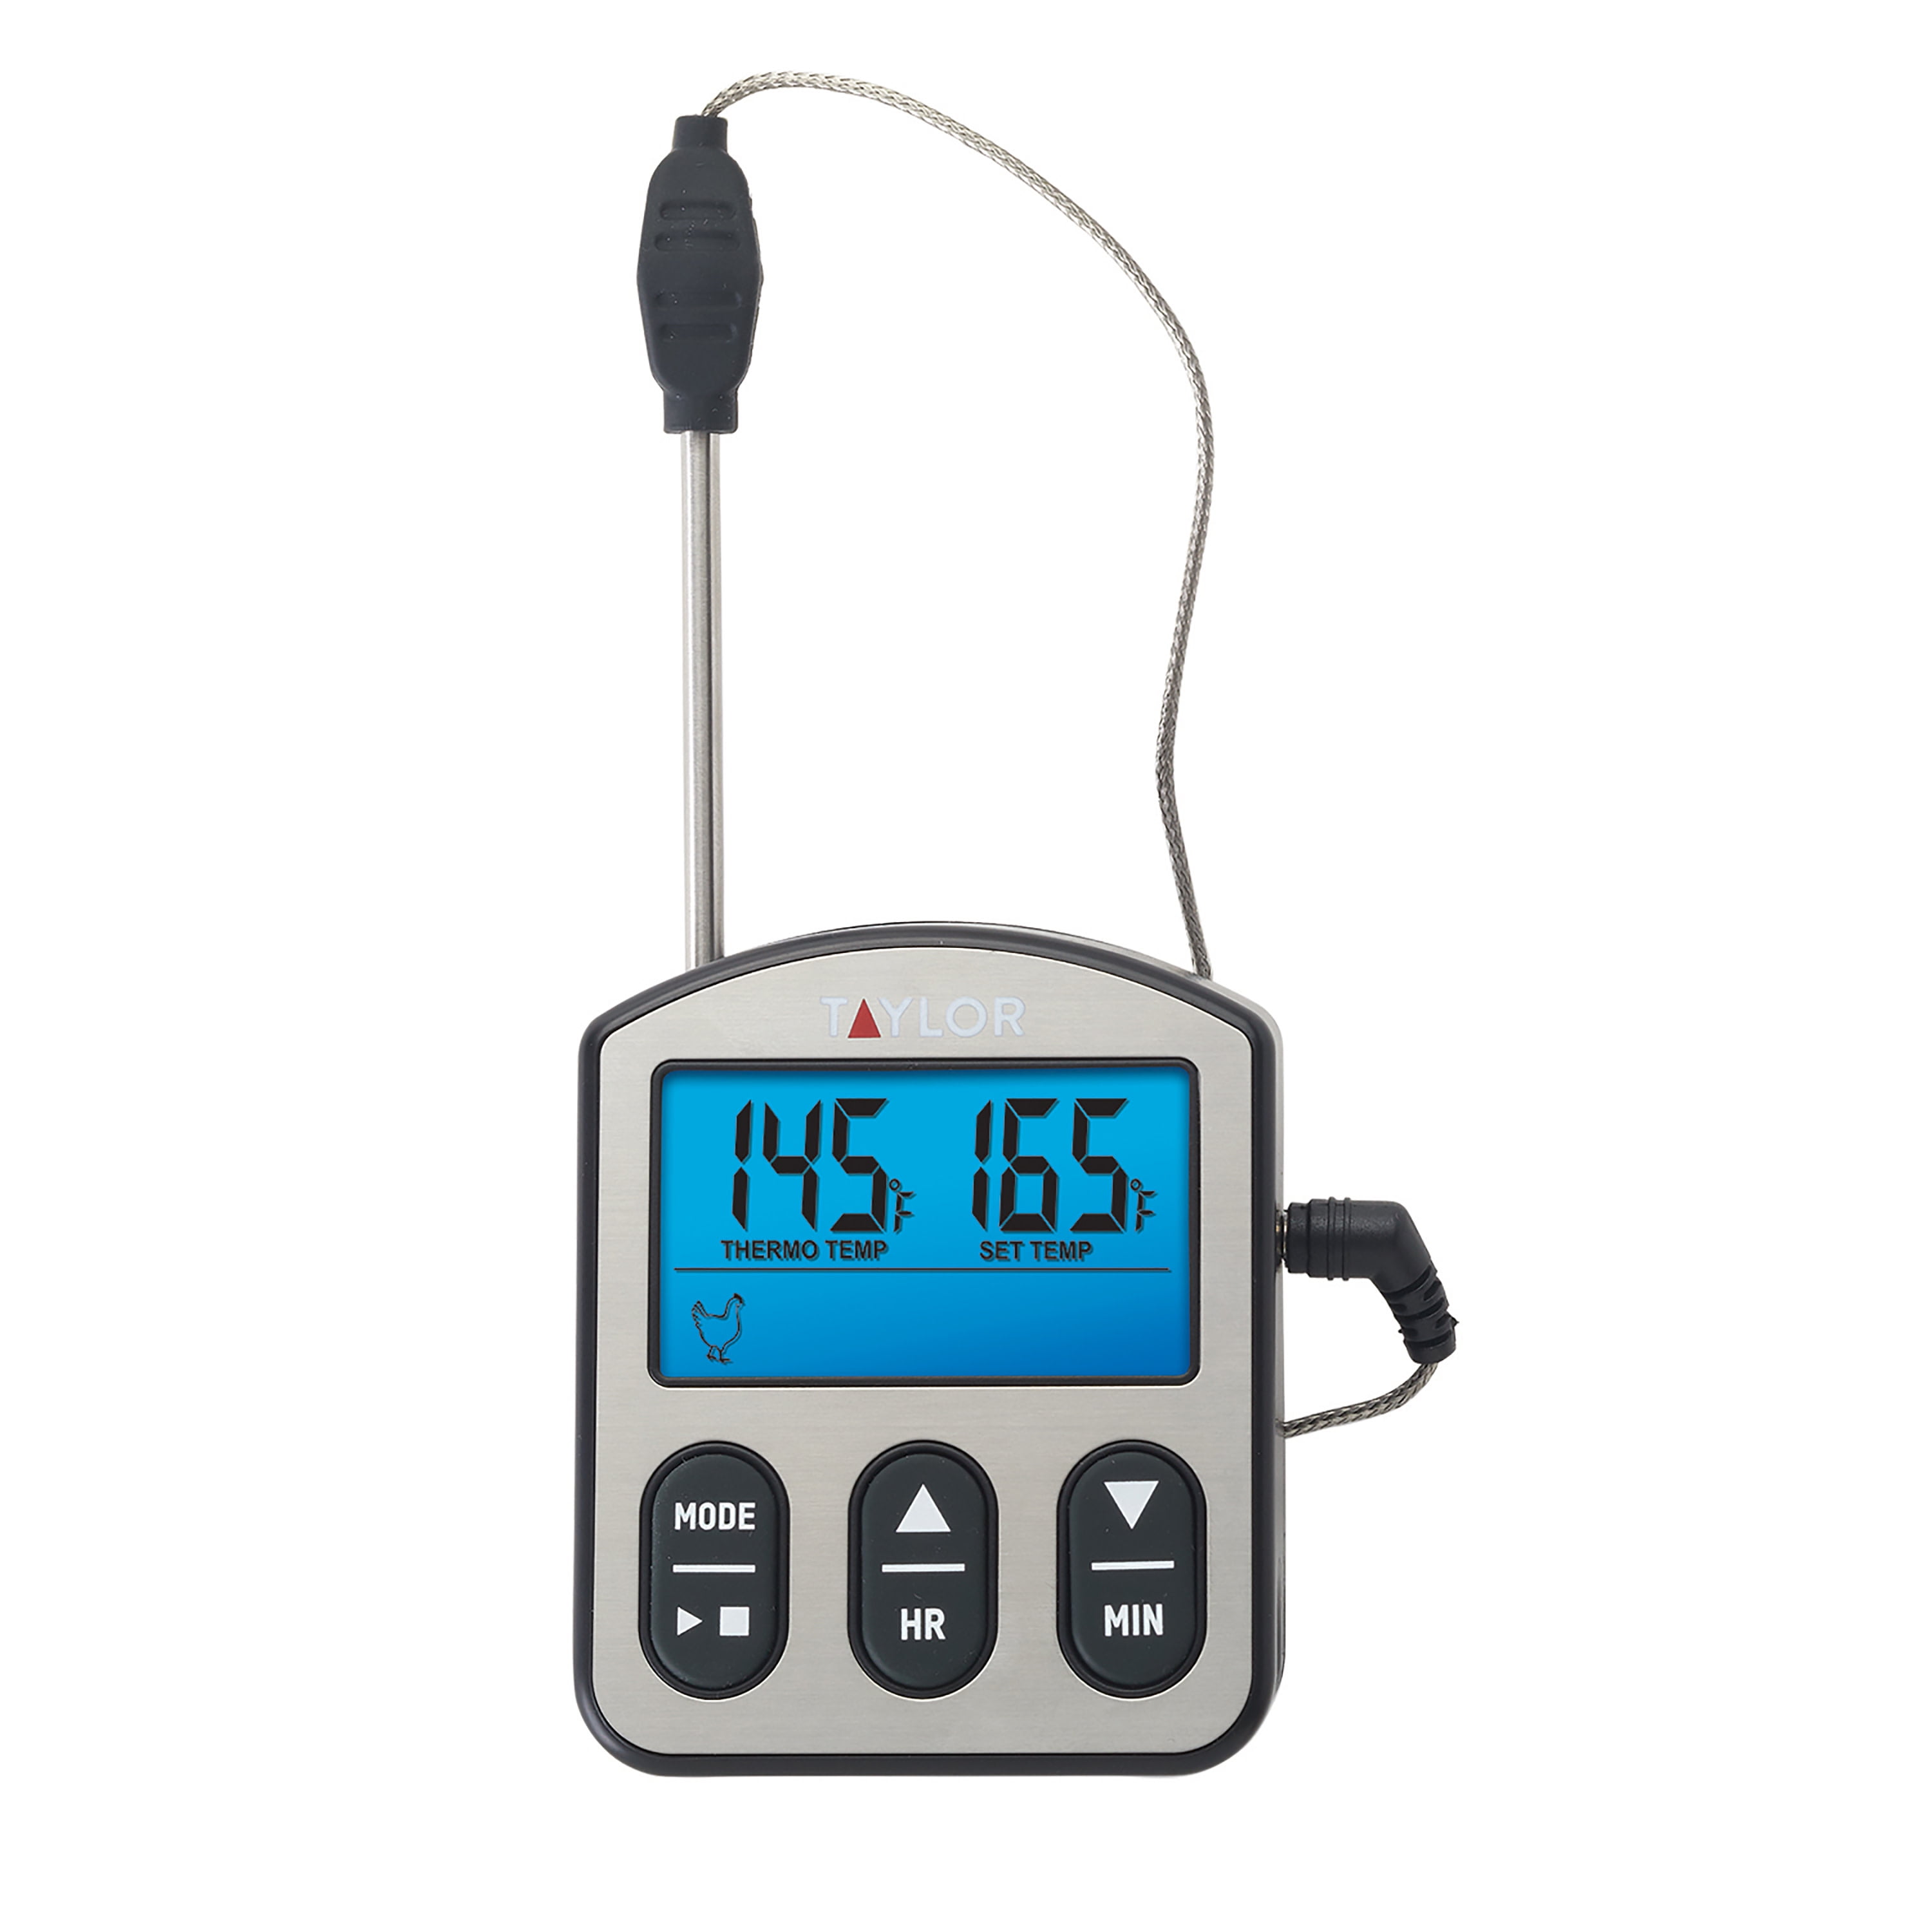 Taylor Five Star Digital Probe Cooking Thermometer w/Backlight Oven Kitchen 